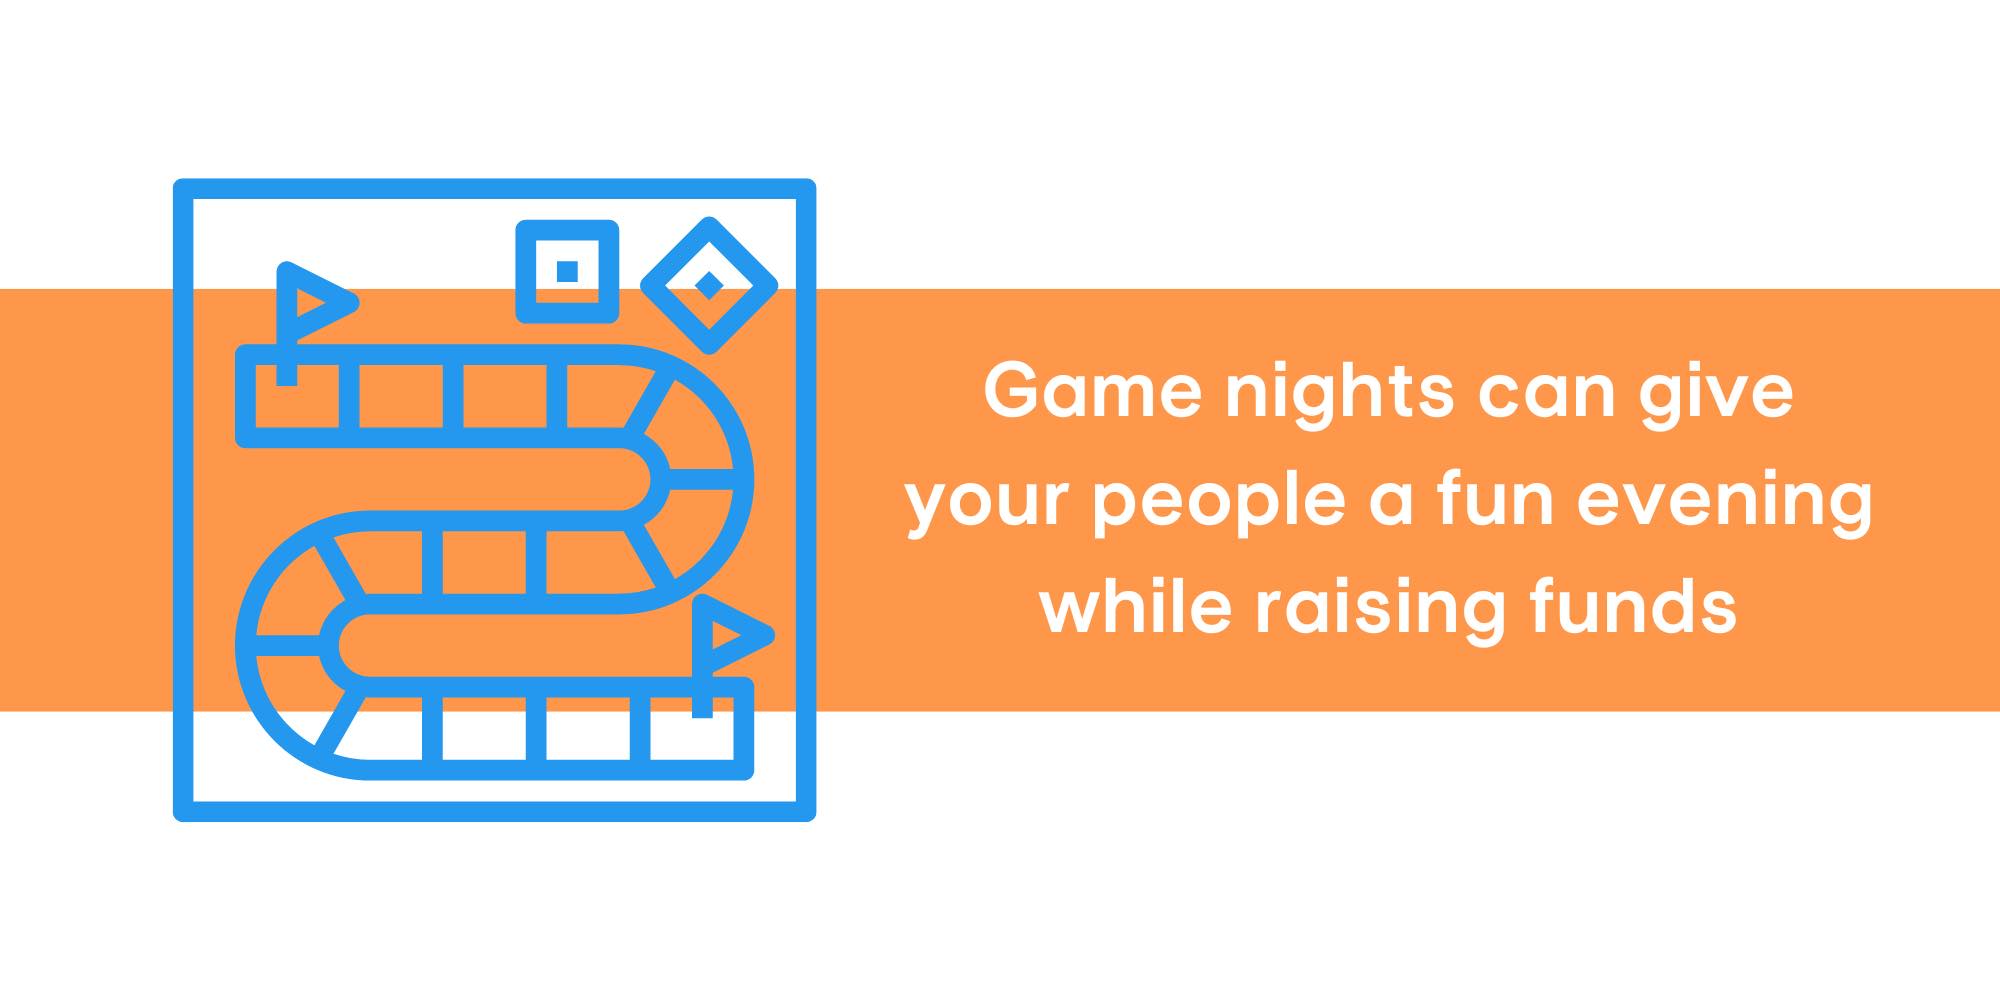 Throw a fun game night to make great memories and raise money for youth camp